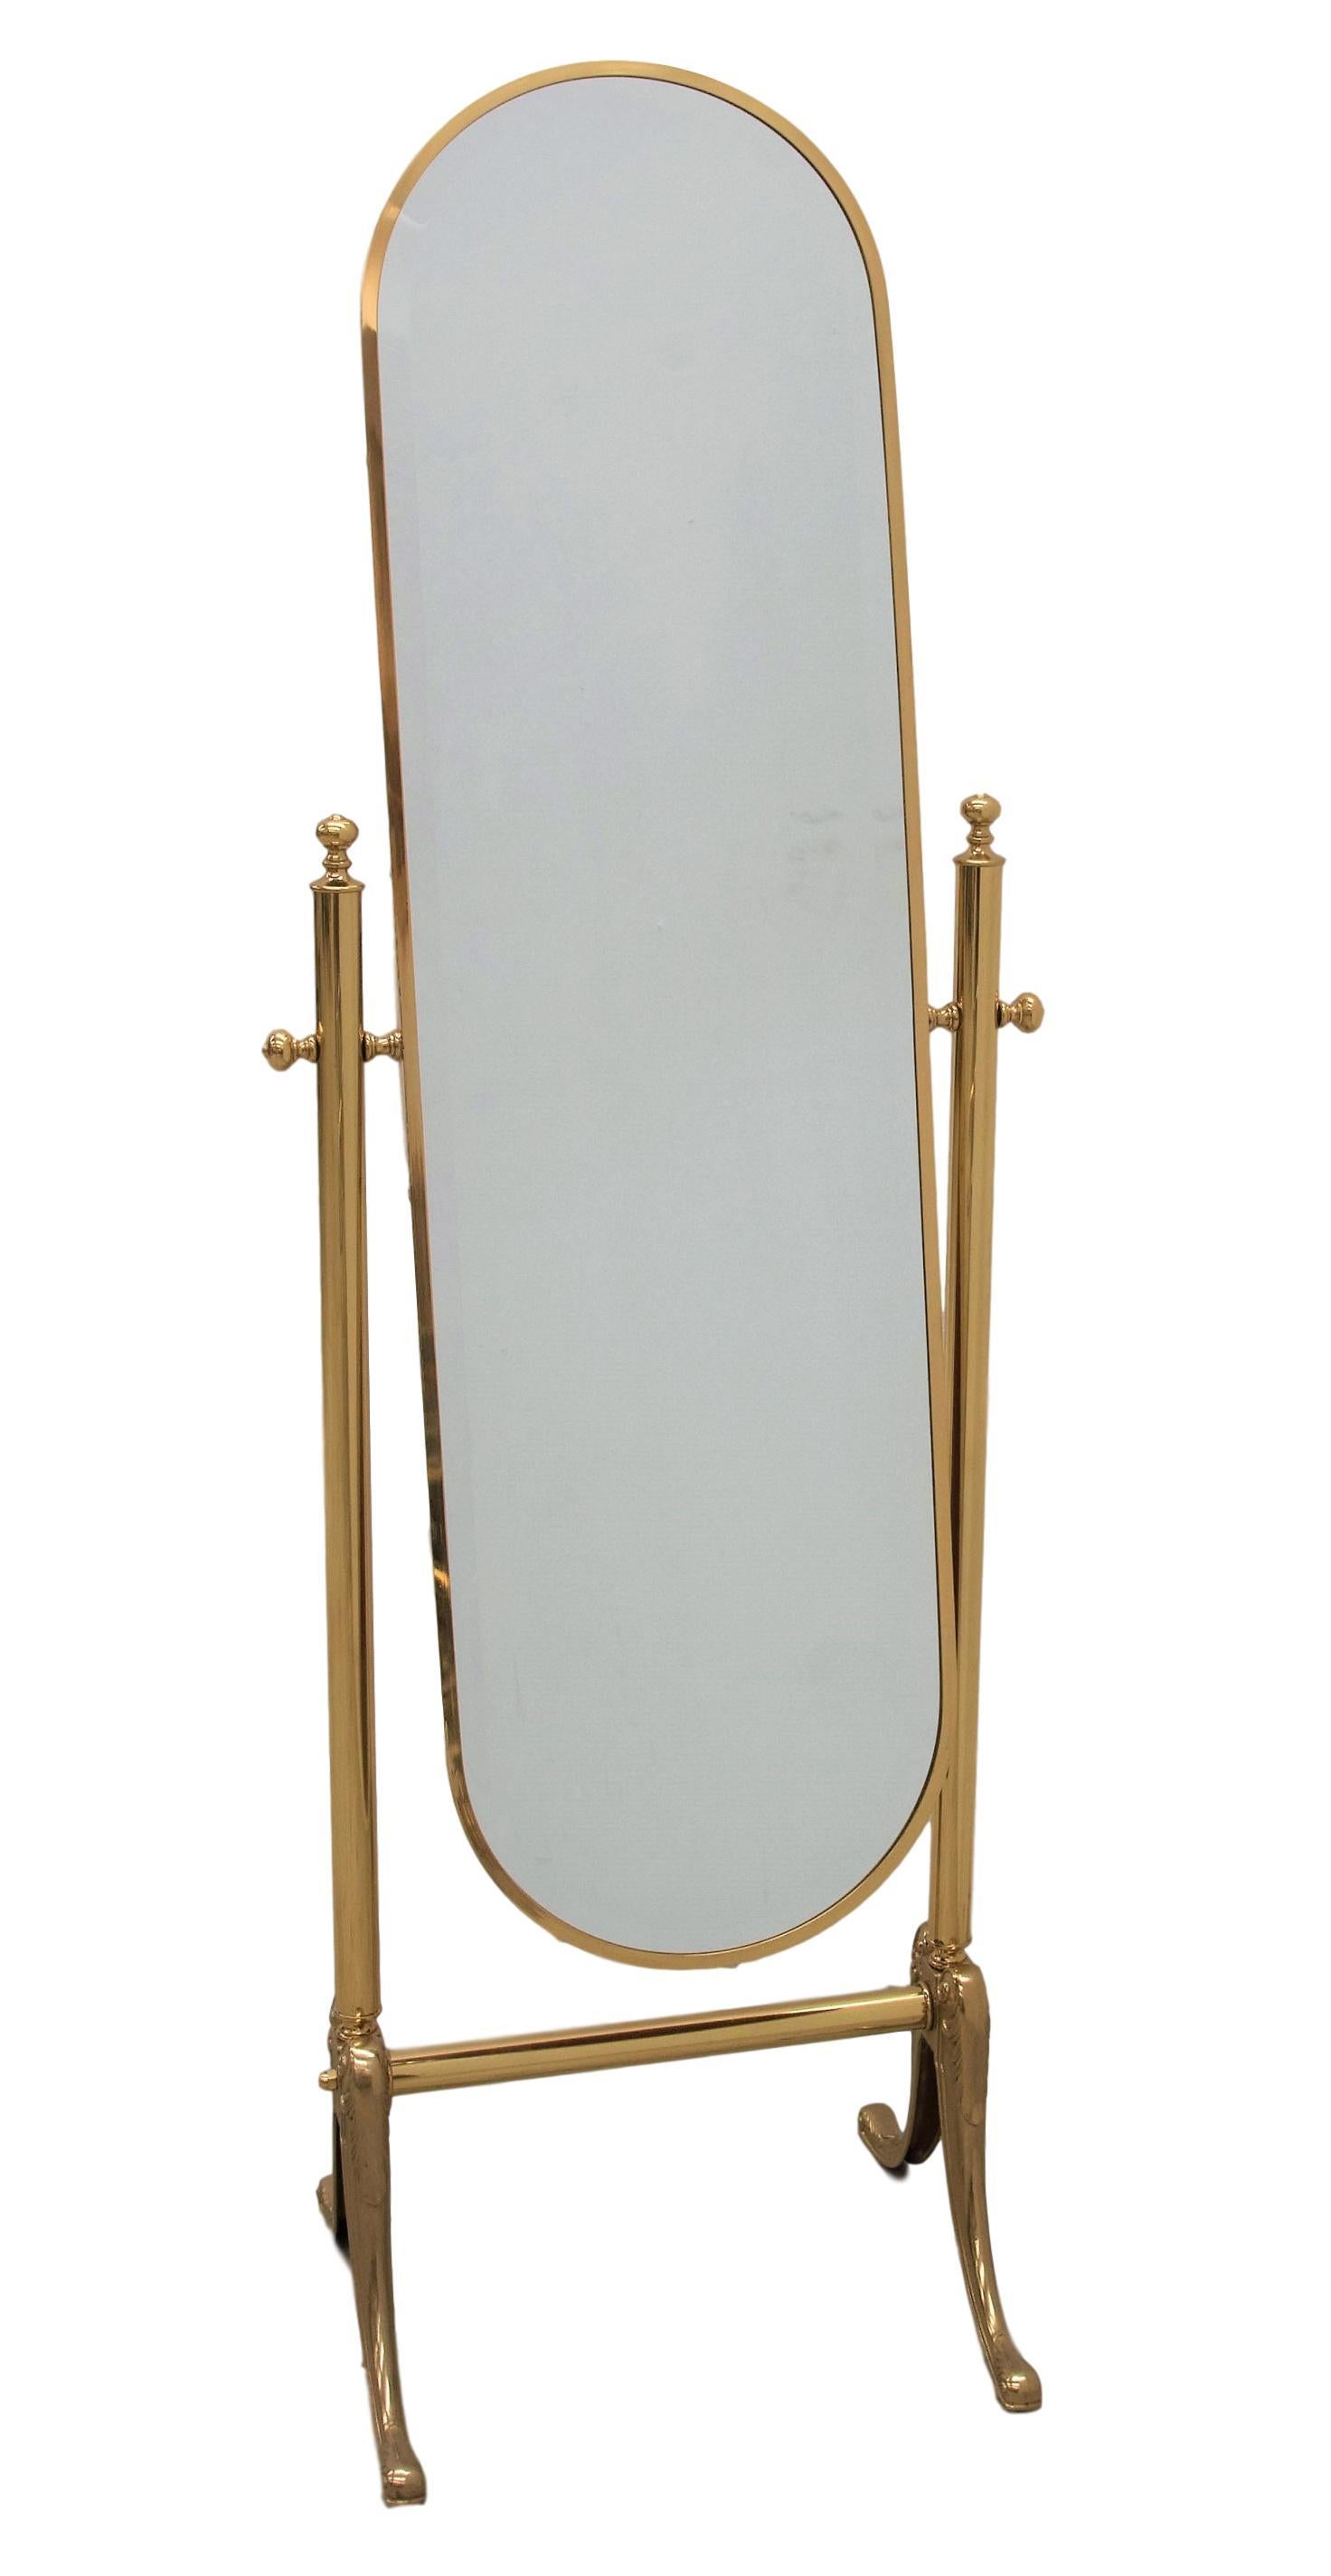 Beautiful brass full-length floor cheval mirror, manufactured in the 1980s in Italy. The mirror can be rotated according to the preferred angle. The conditions are excellent, with very minor fading and patina.

A great piece that perfectly adds to